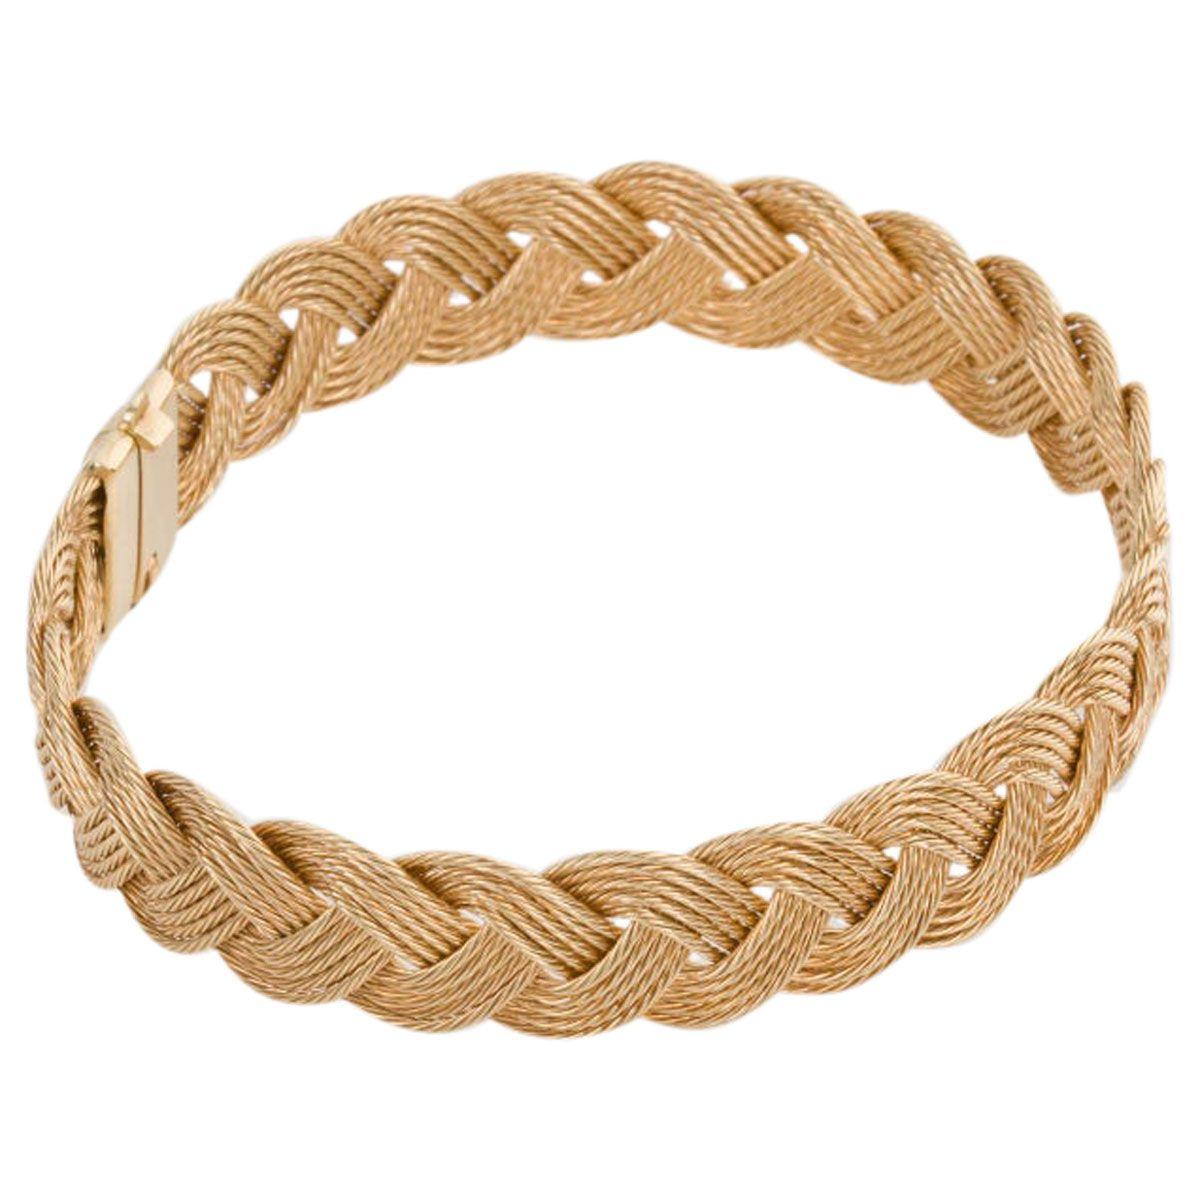 Great for everyday wear, this cute little bracelet is ideal for any age and is so wearable. Understated and simple but could be worn with other bracelets/bangles to create the ultimate wrist stack. It's flexible and sits comfortably on the arm. 
The